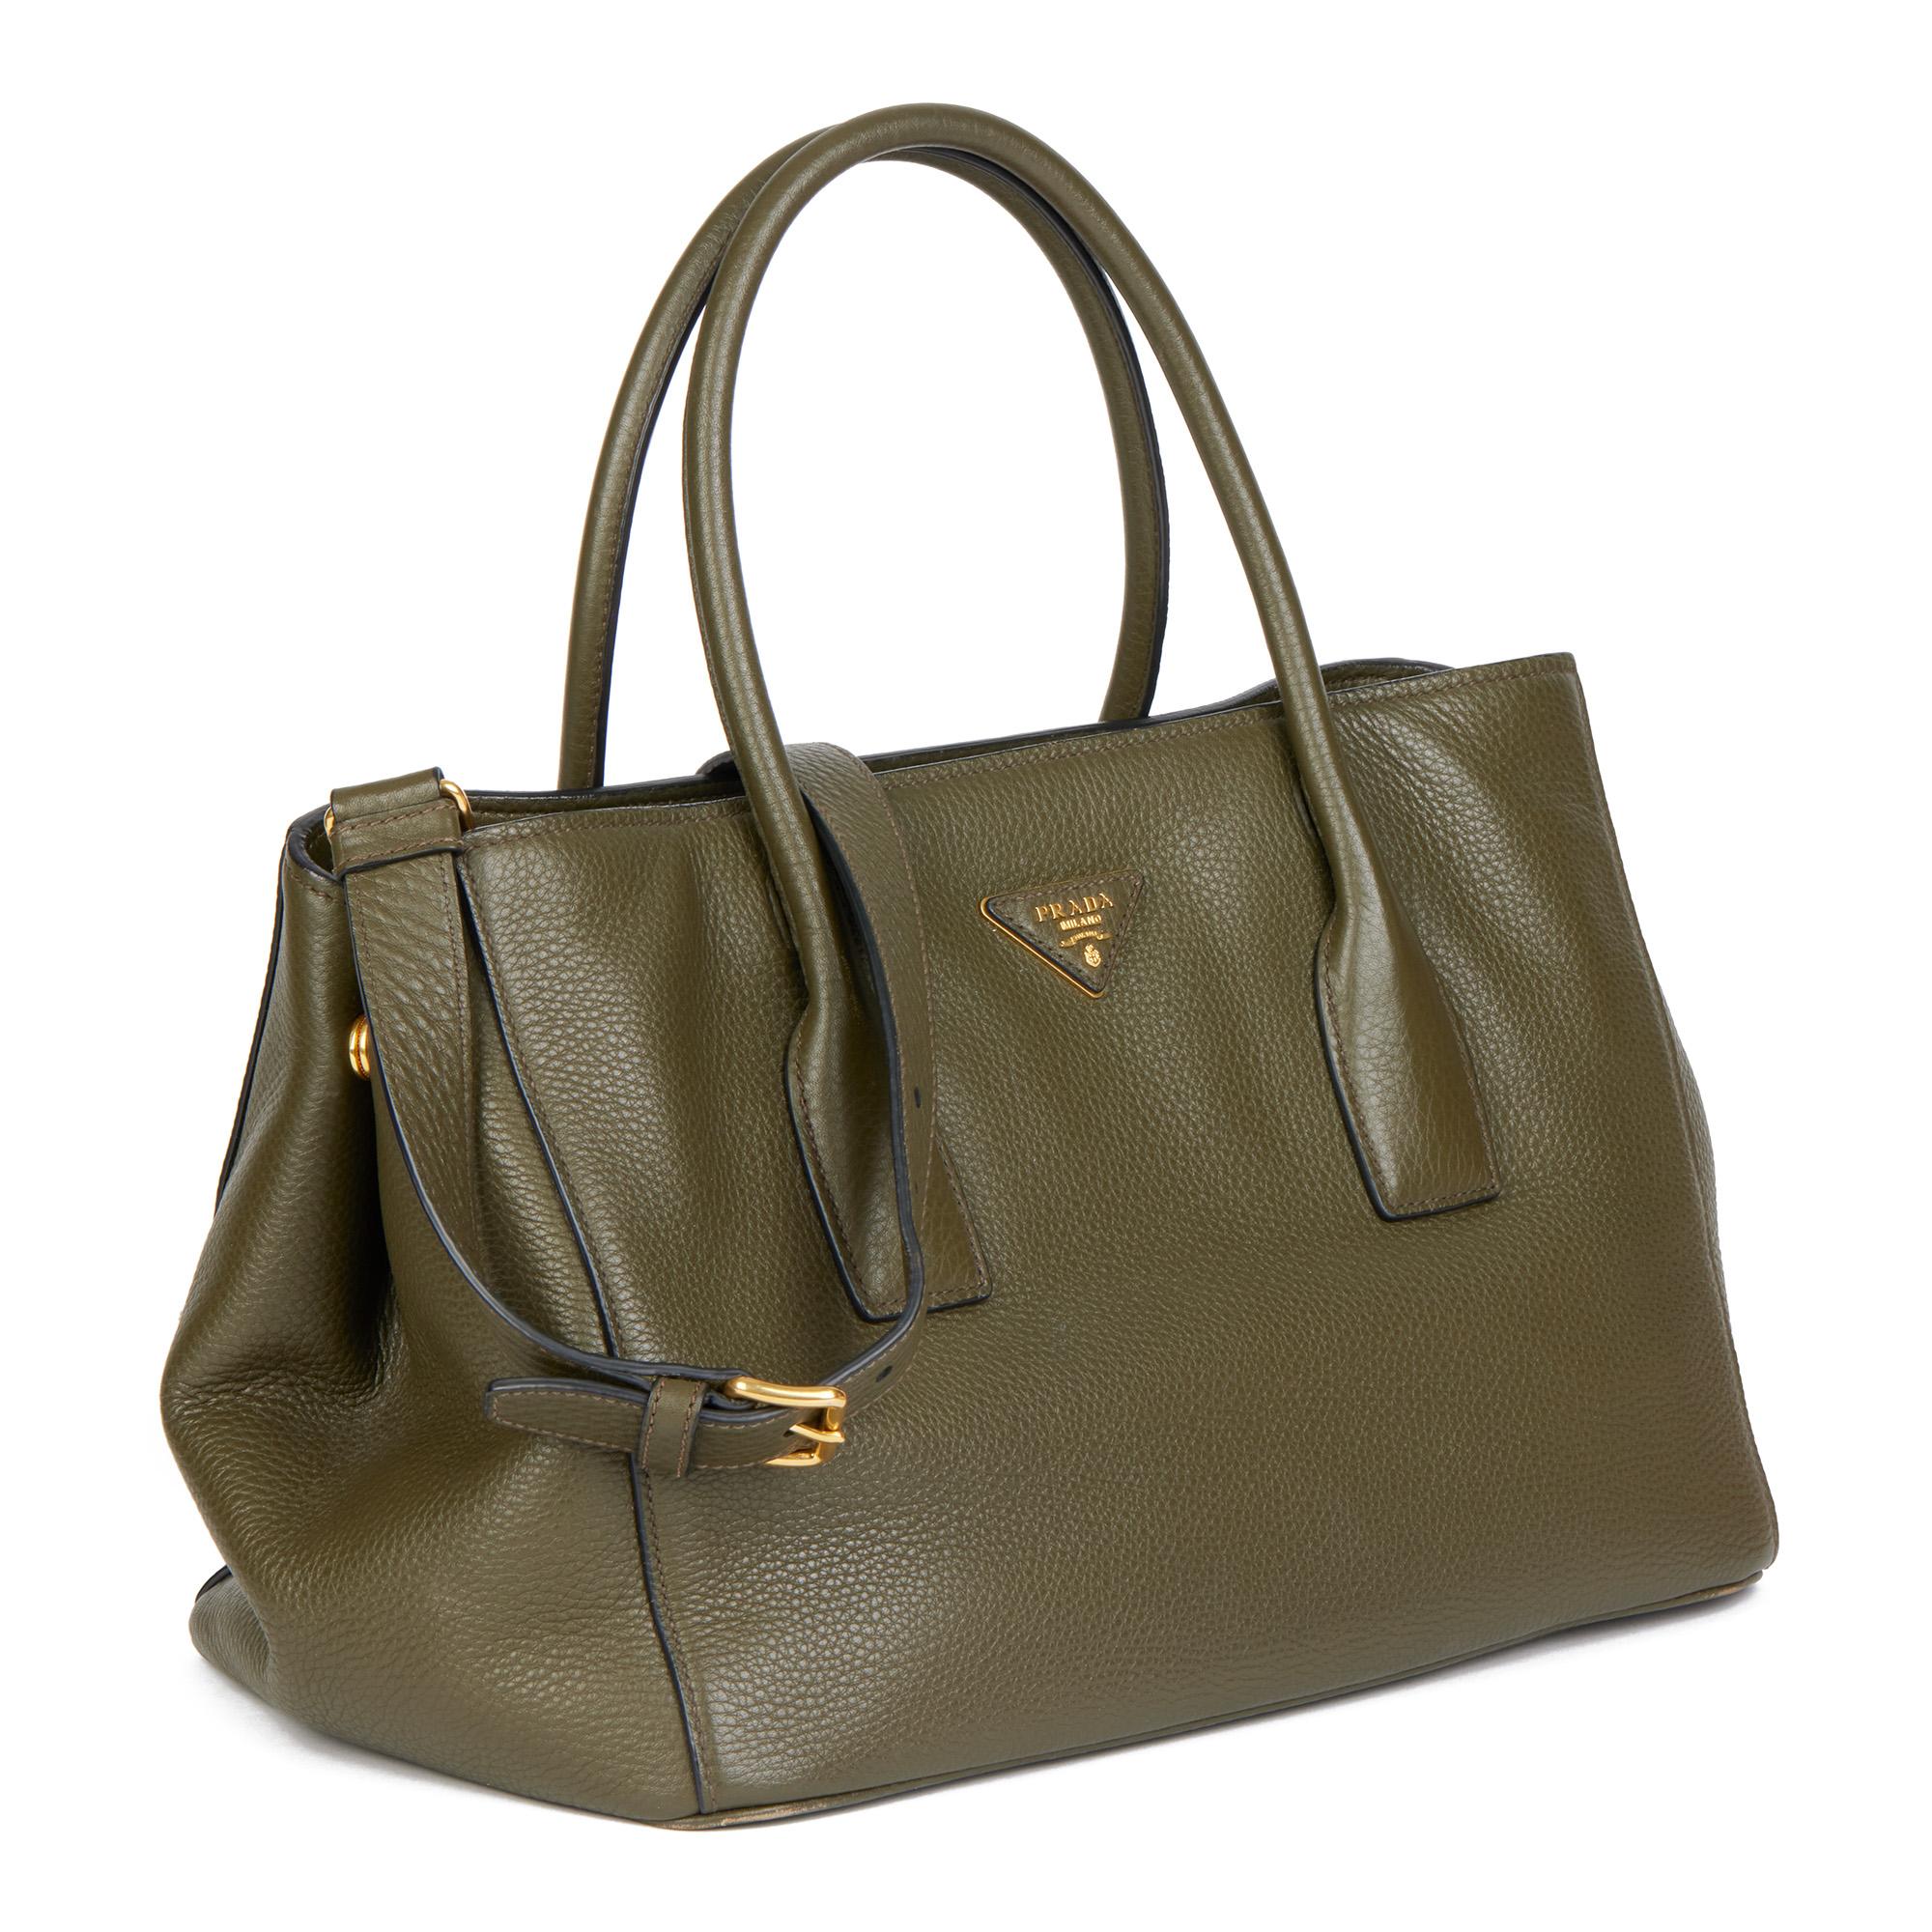 PRADA
Militare Saffiano Leather Daino Shopping Tote

Serial Number: 208
Age (Circa): 2020
Accompanied By: Prada Dust Bag, Authenticity Card, Care Booklet
Authenticity Details: Date Stamp (Made in France)
Gender: Ladies
Type: Tote, Shoulder,